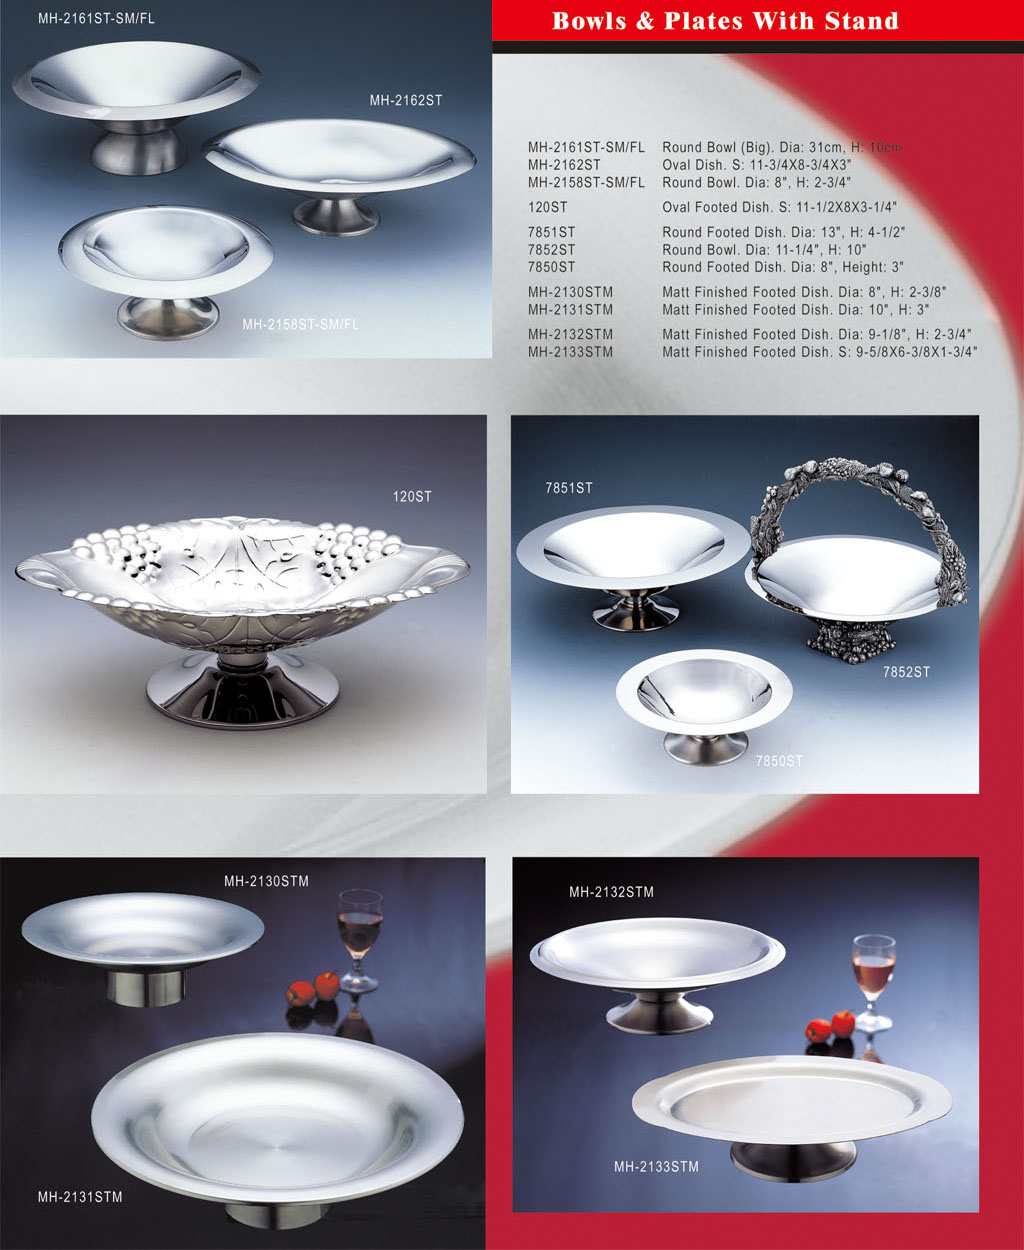 Stainless Steel Ware - Bowls & Plates With Stand